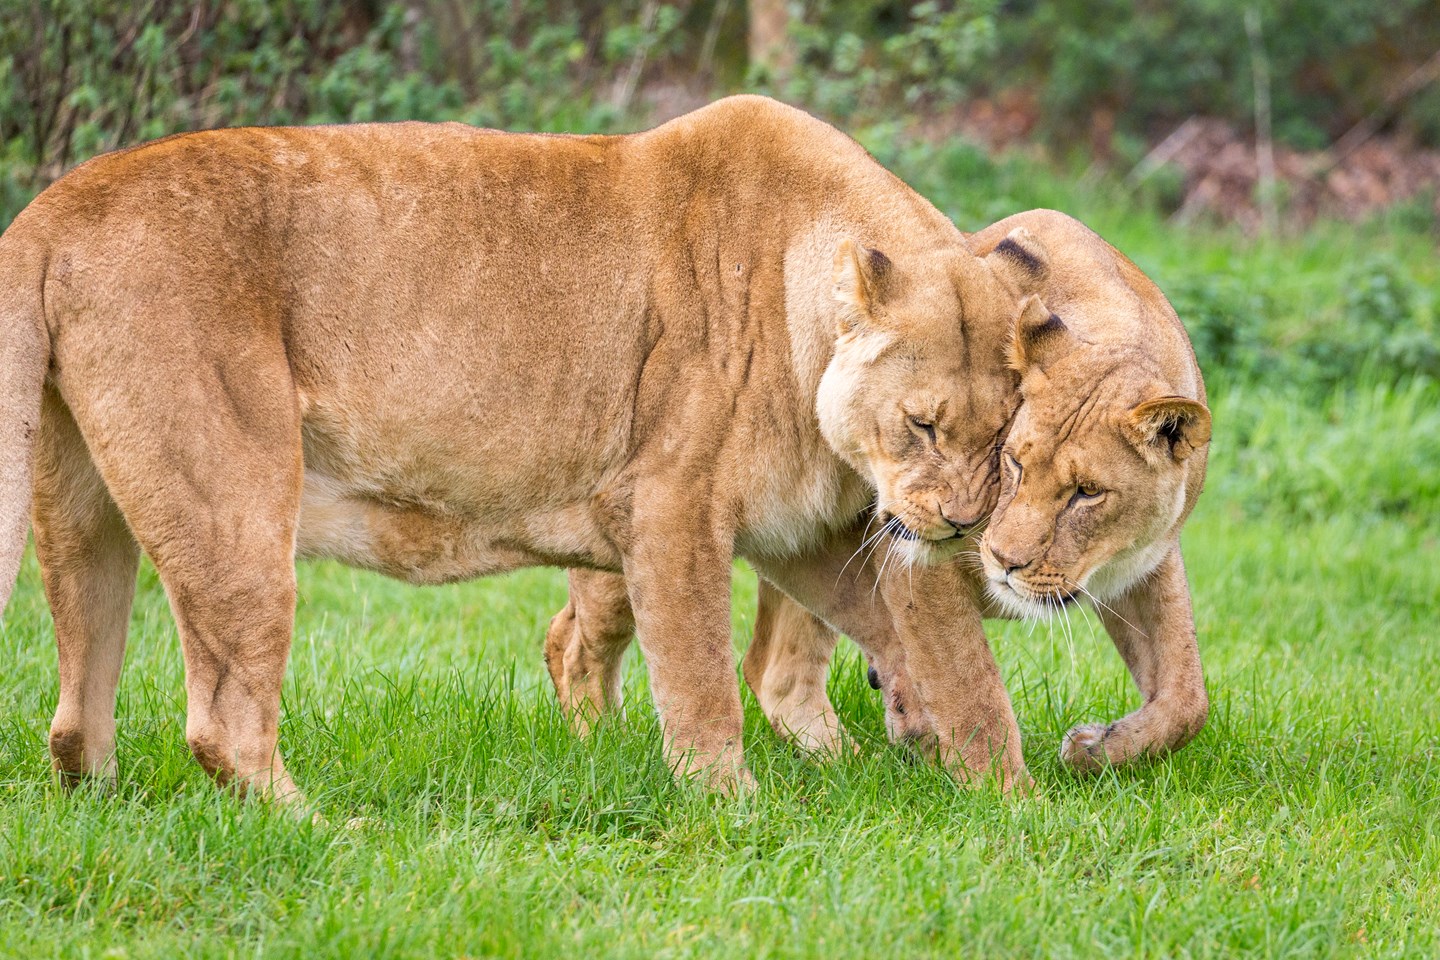 Two female lions press their faces together while walking in the grass